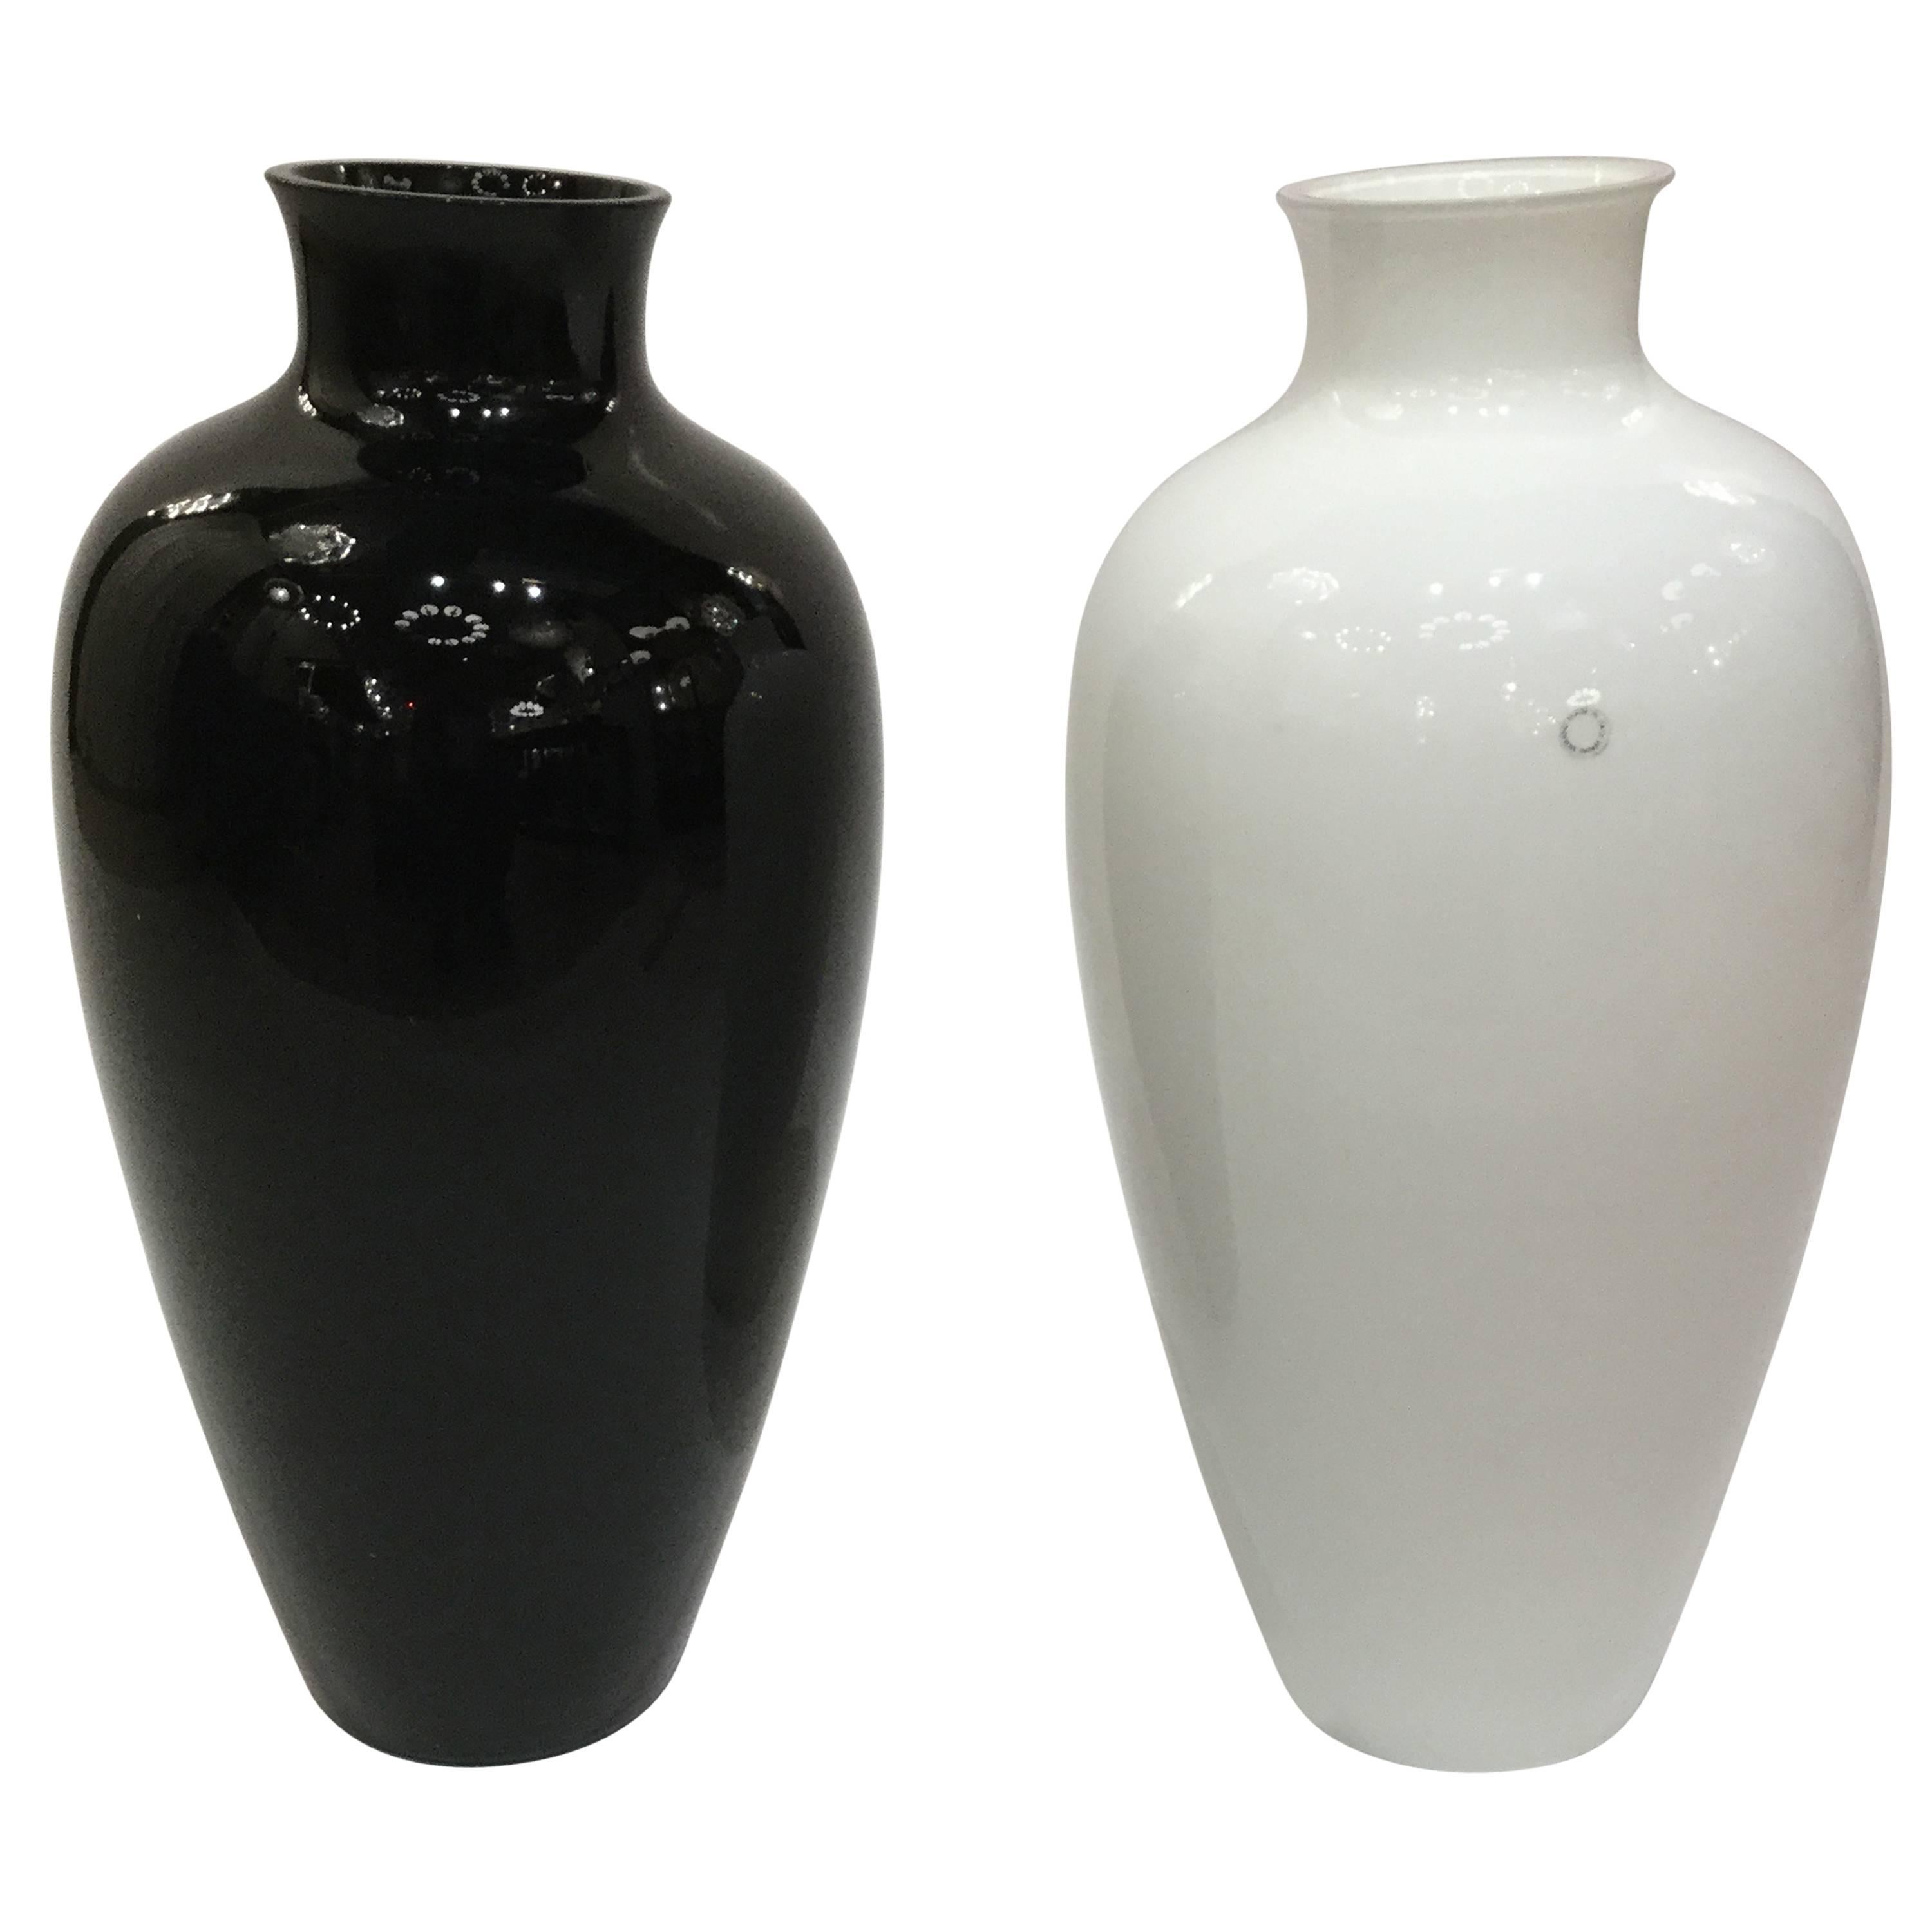 "Cinese" Pair of Large Italian Art Glass Vases by Paolo Venini